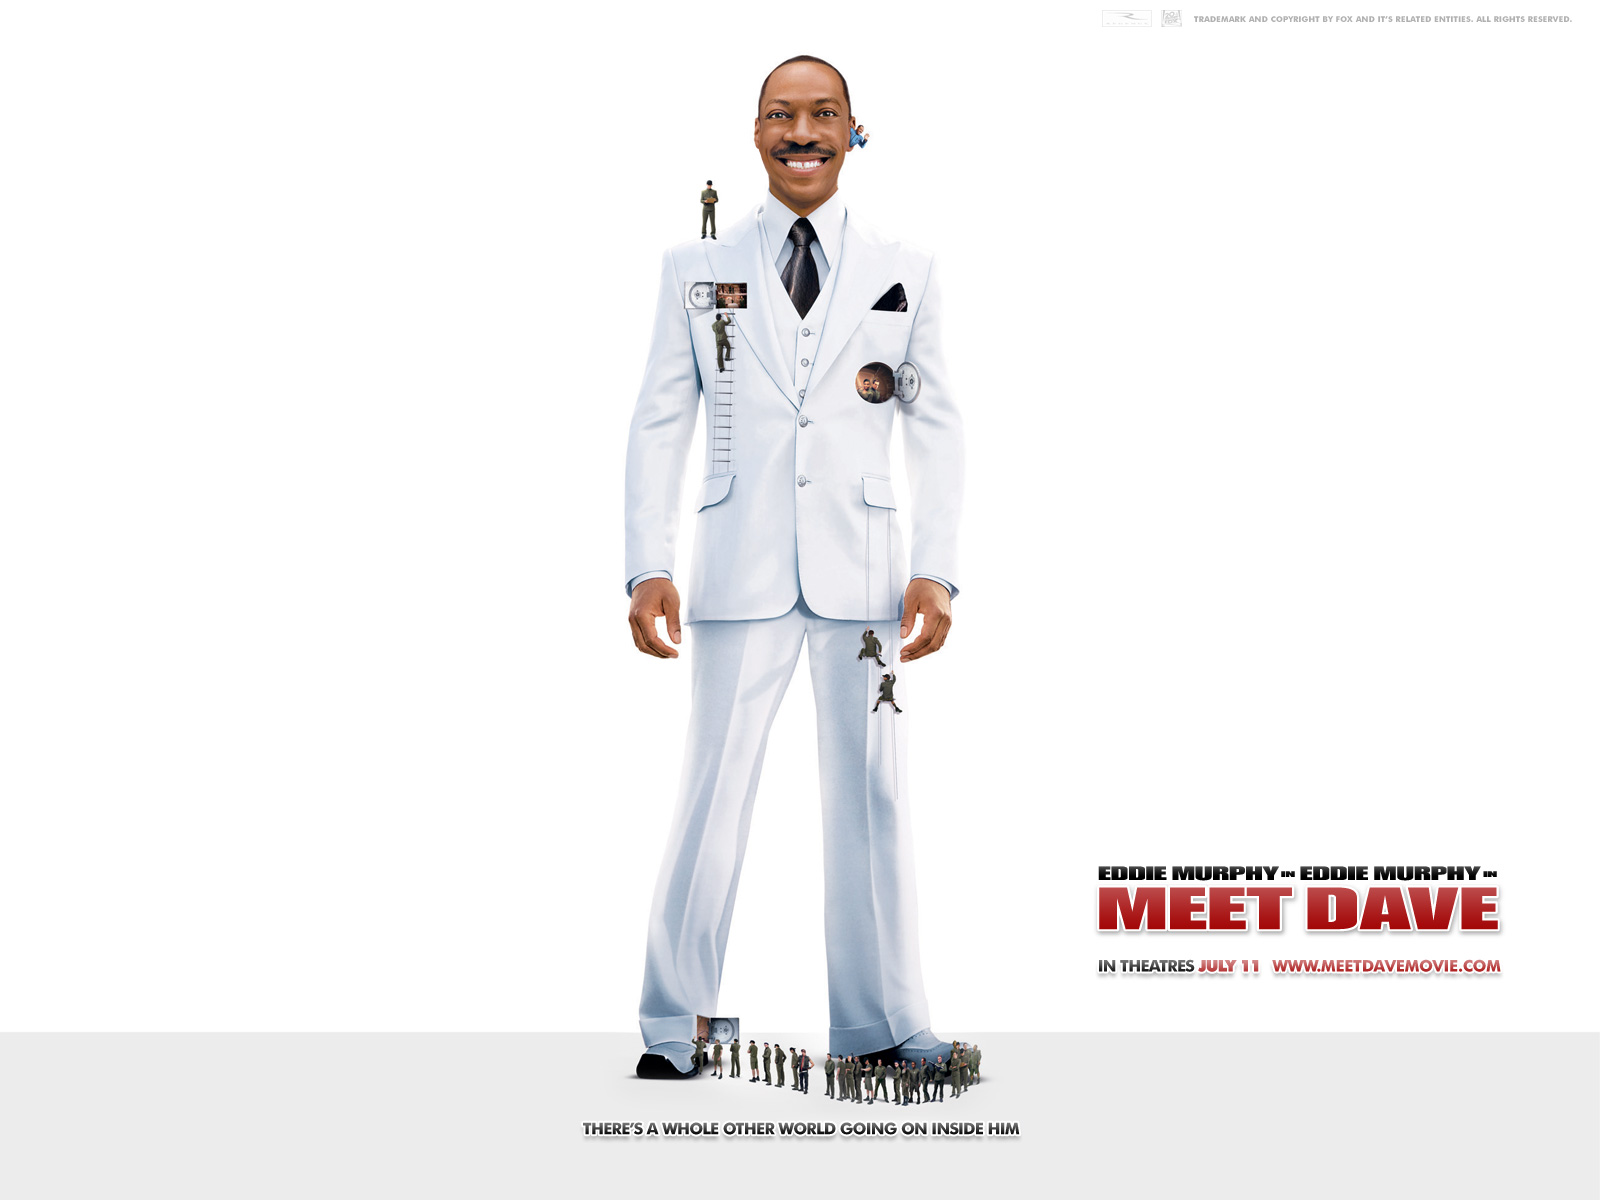 Download High quality Meet Dave wallpaper / Movies / 1600x1200